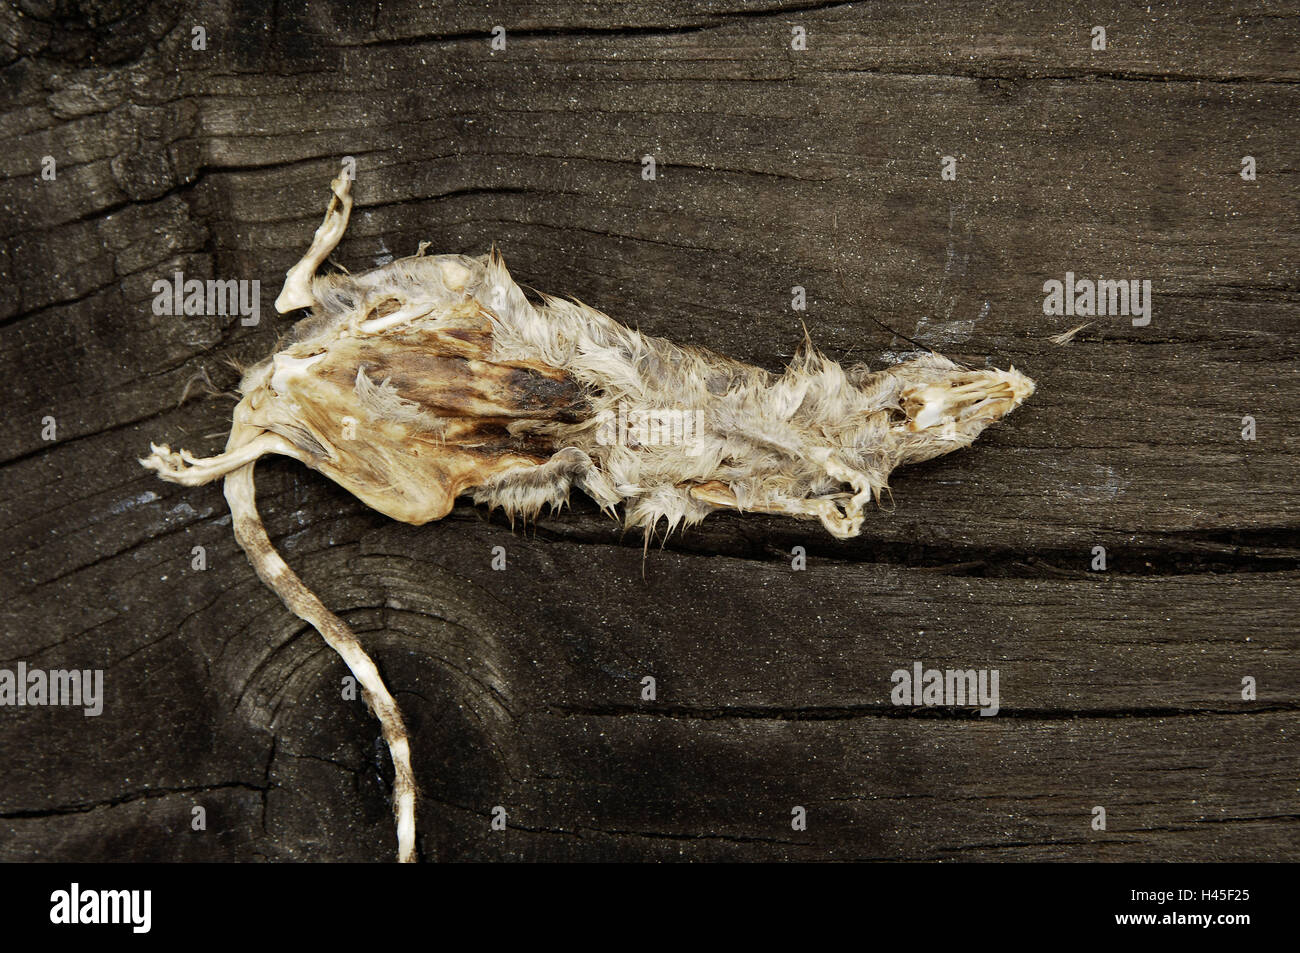 Rat, poisons, rodents, animal, mammal, deadly, death, expiration, sepsis, rot, disgust, rat's pest, pest, vermin, Stock Photo